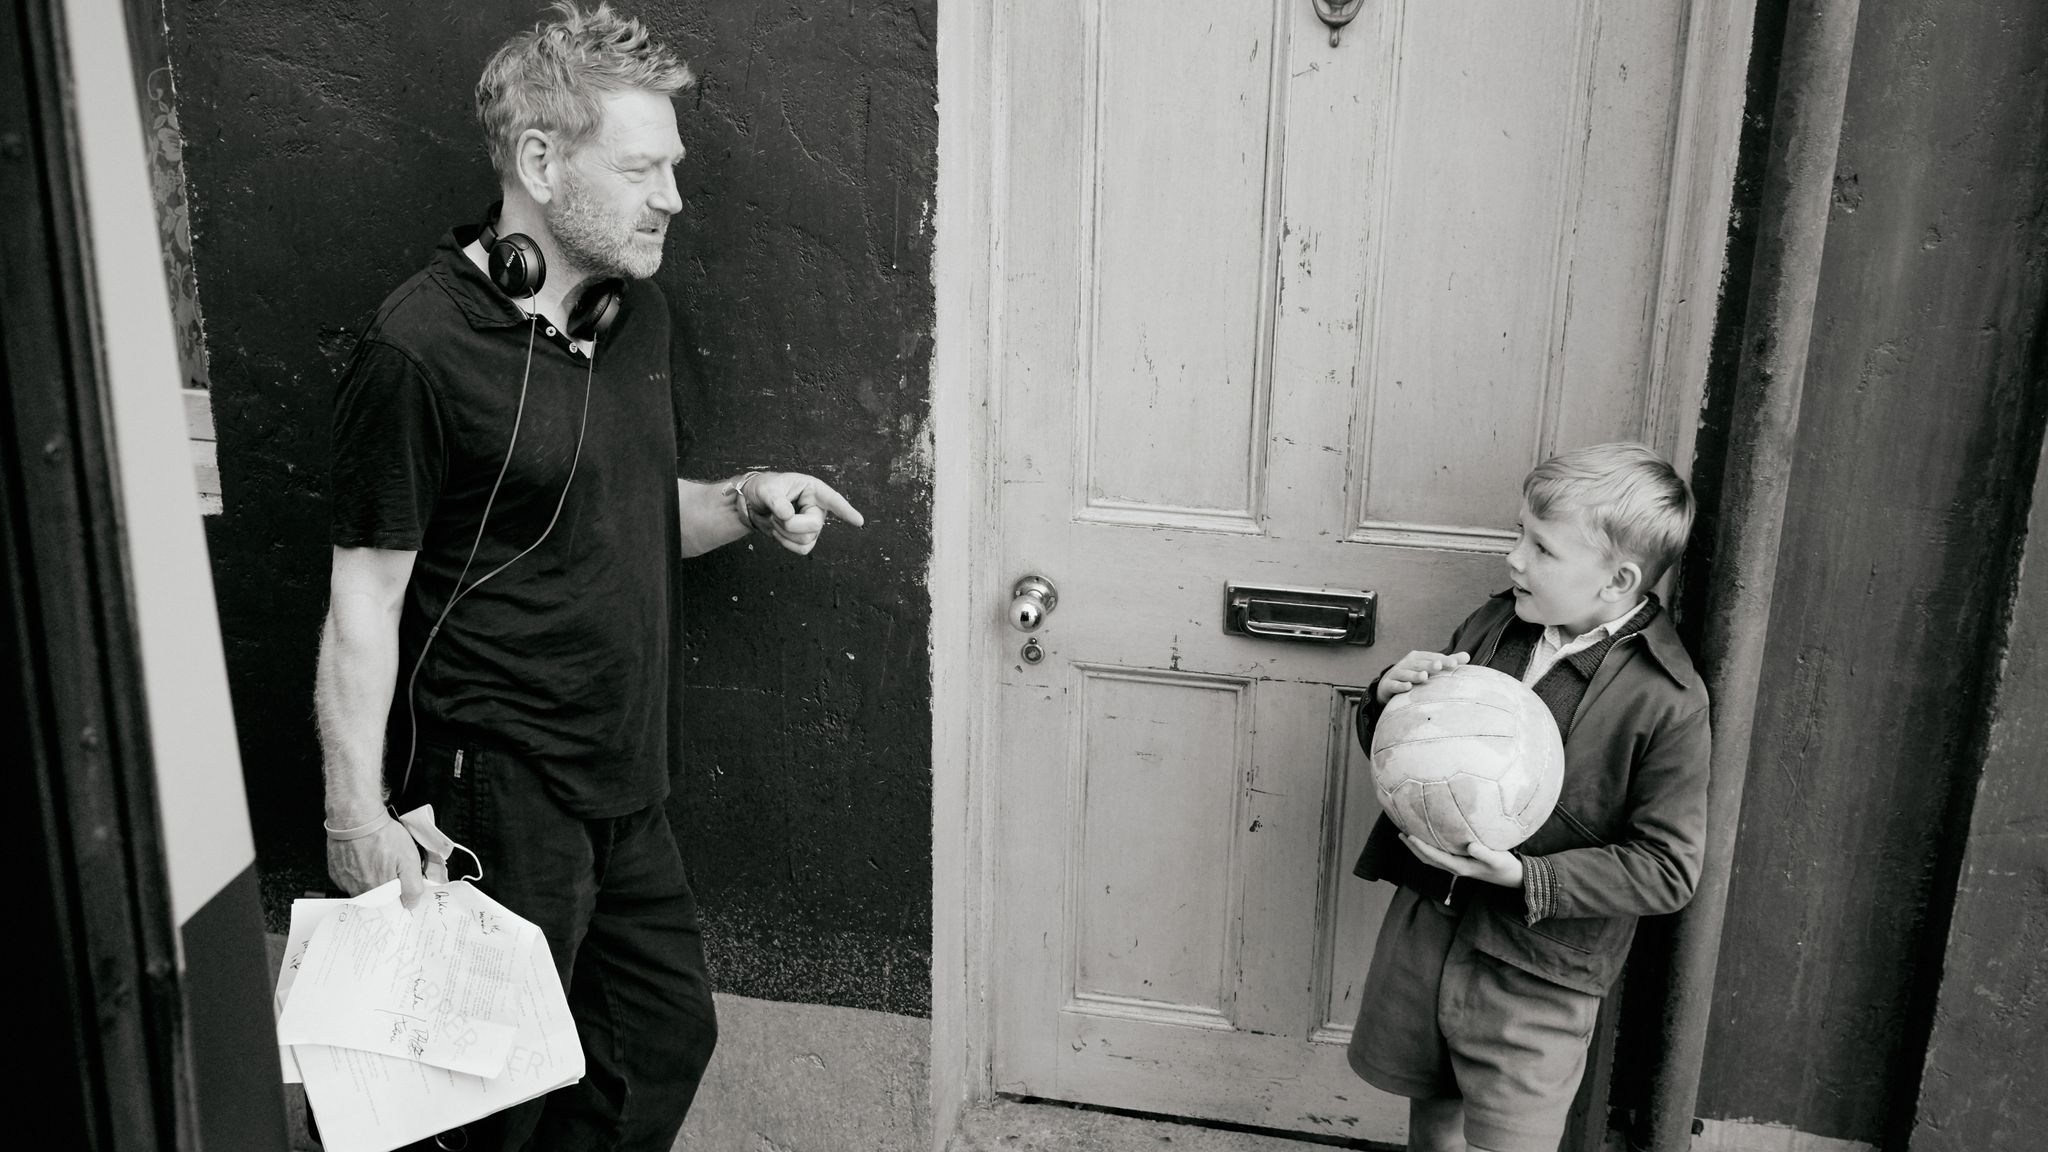 Director Kenneth Branagh (left) and actor Jude Hill (right) on the set of Belfast. Pic: Rob Youngson/Focus Features